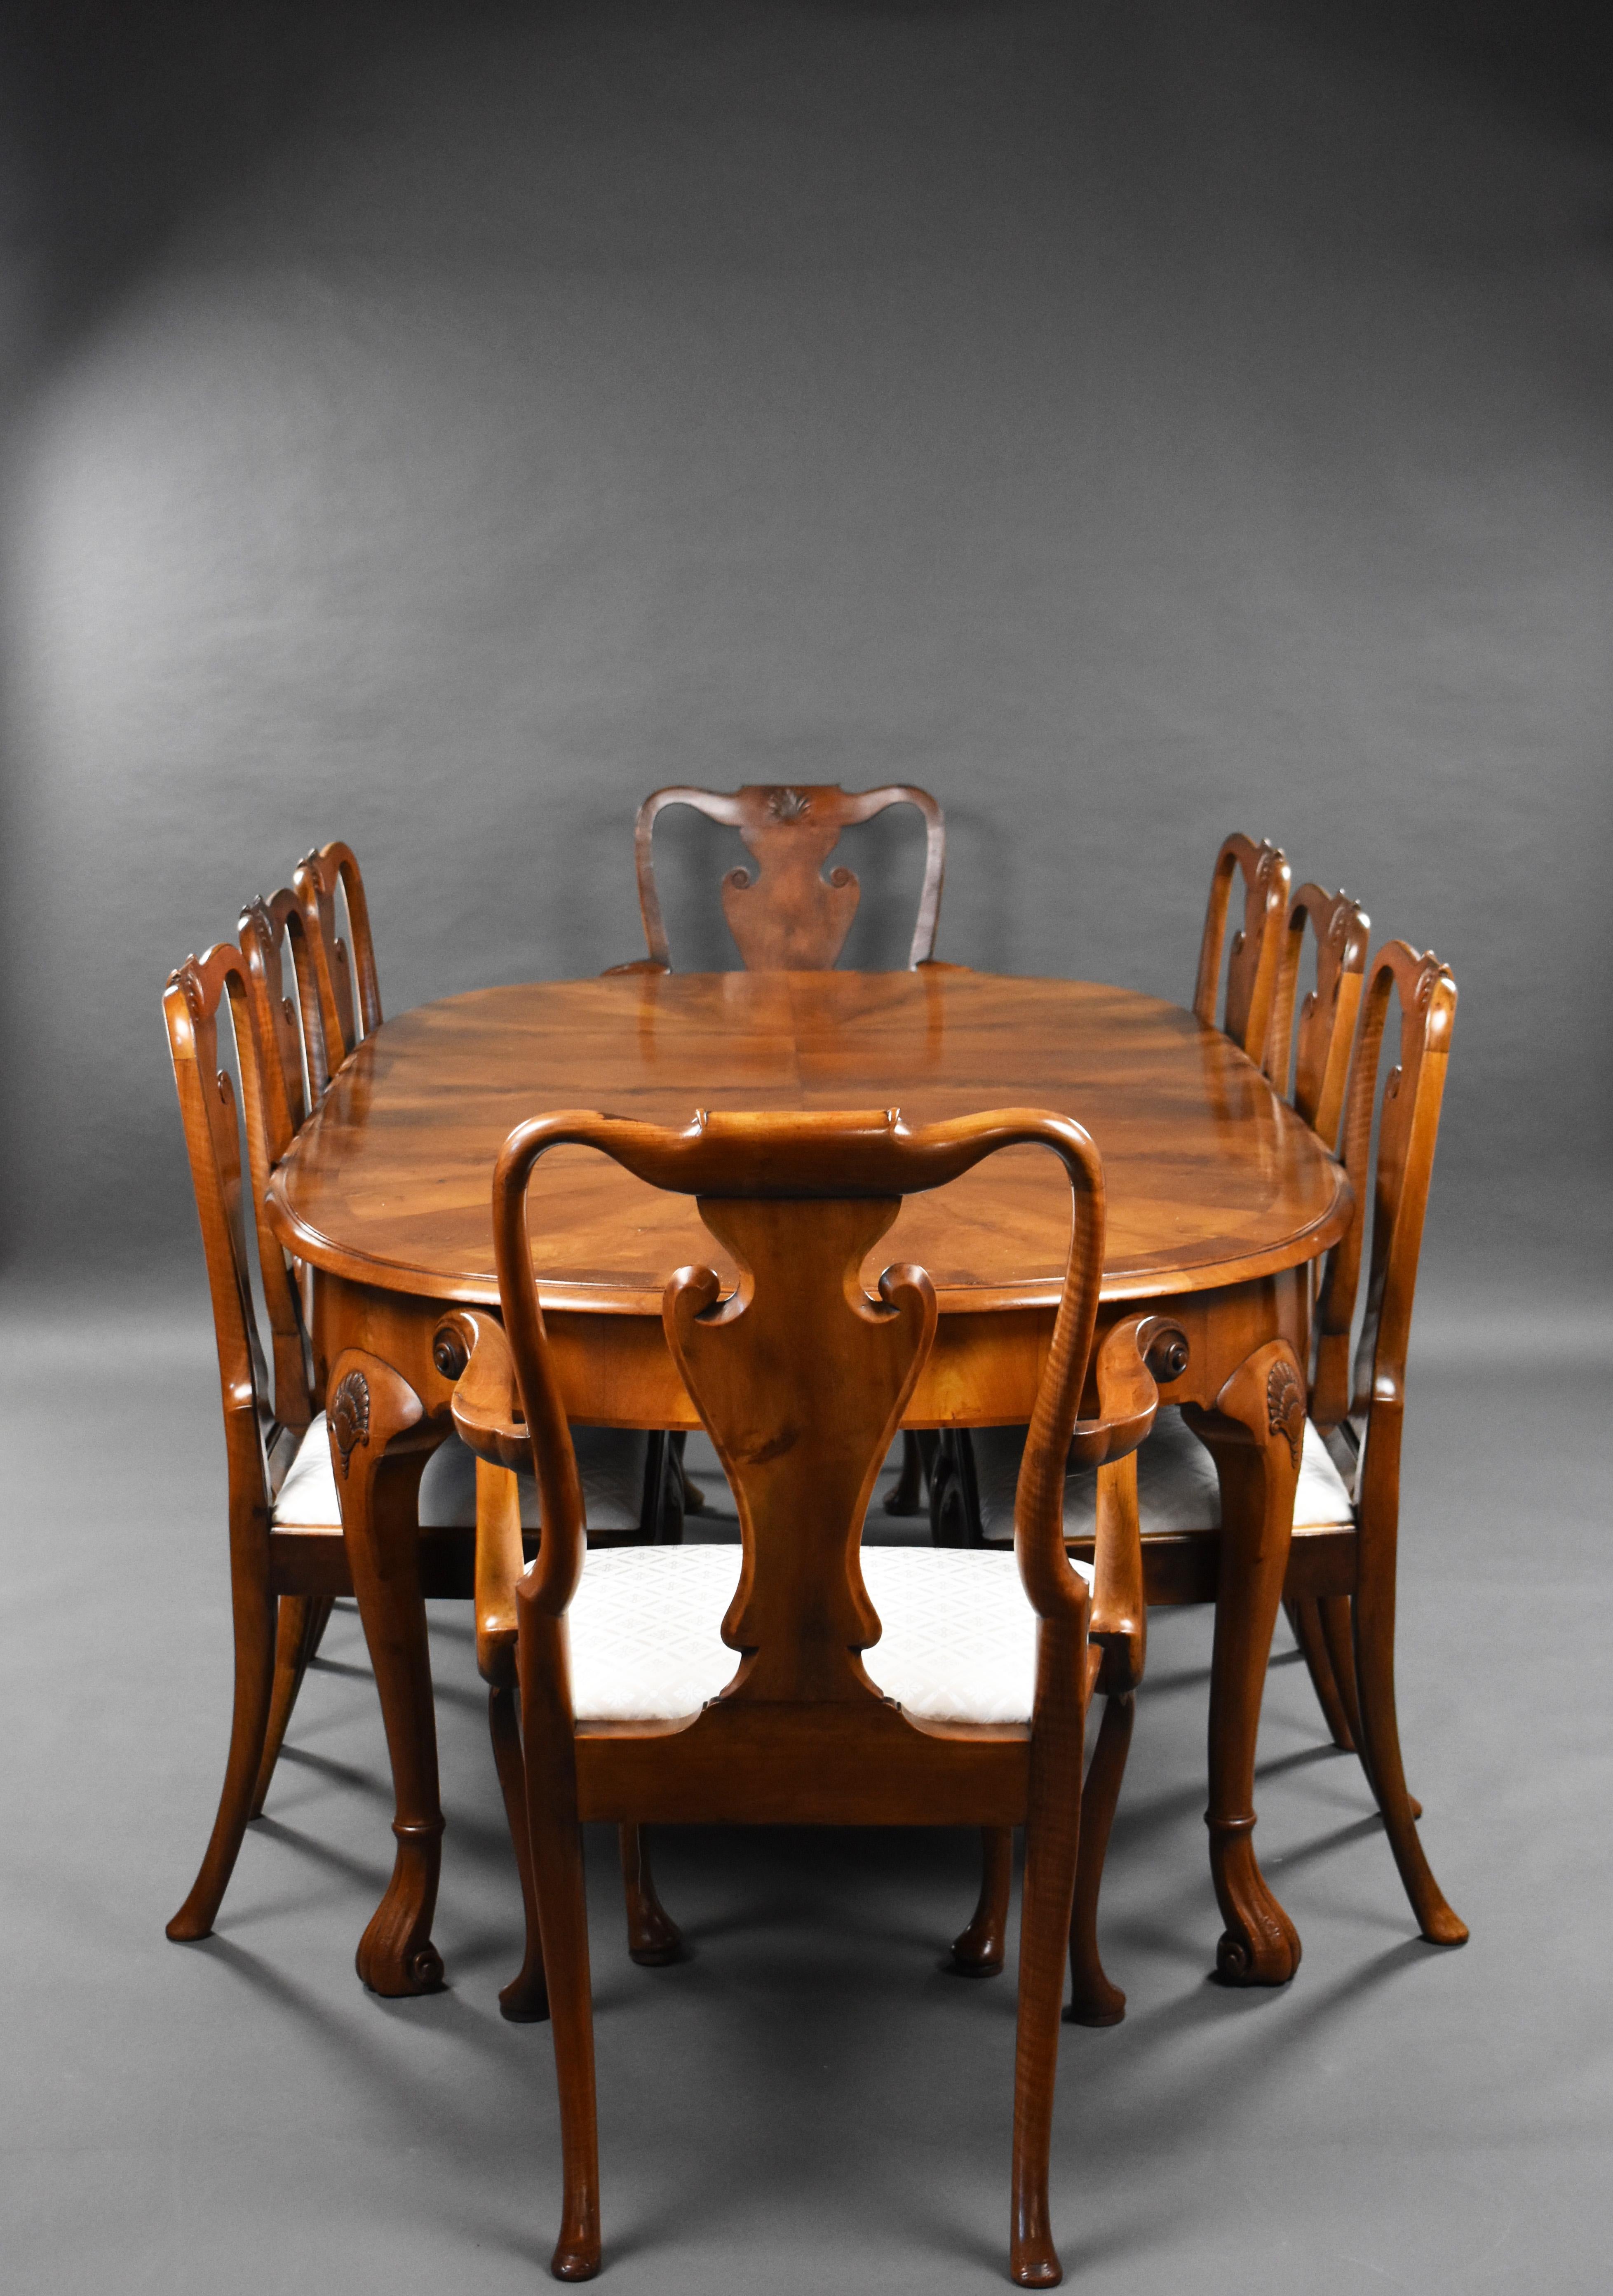 For sale is a good quality walnut extending dining table & chairs. The set of chairs, in the Queen Anne Style, have vase shaped backs, standing on cabriole legs. The table has a well figured top and an additional leaf, standing on cabriole legs with